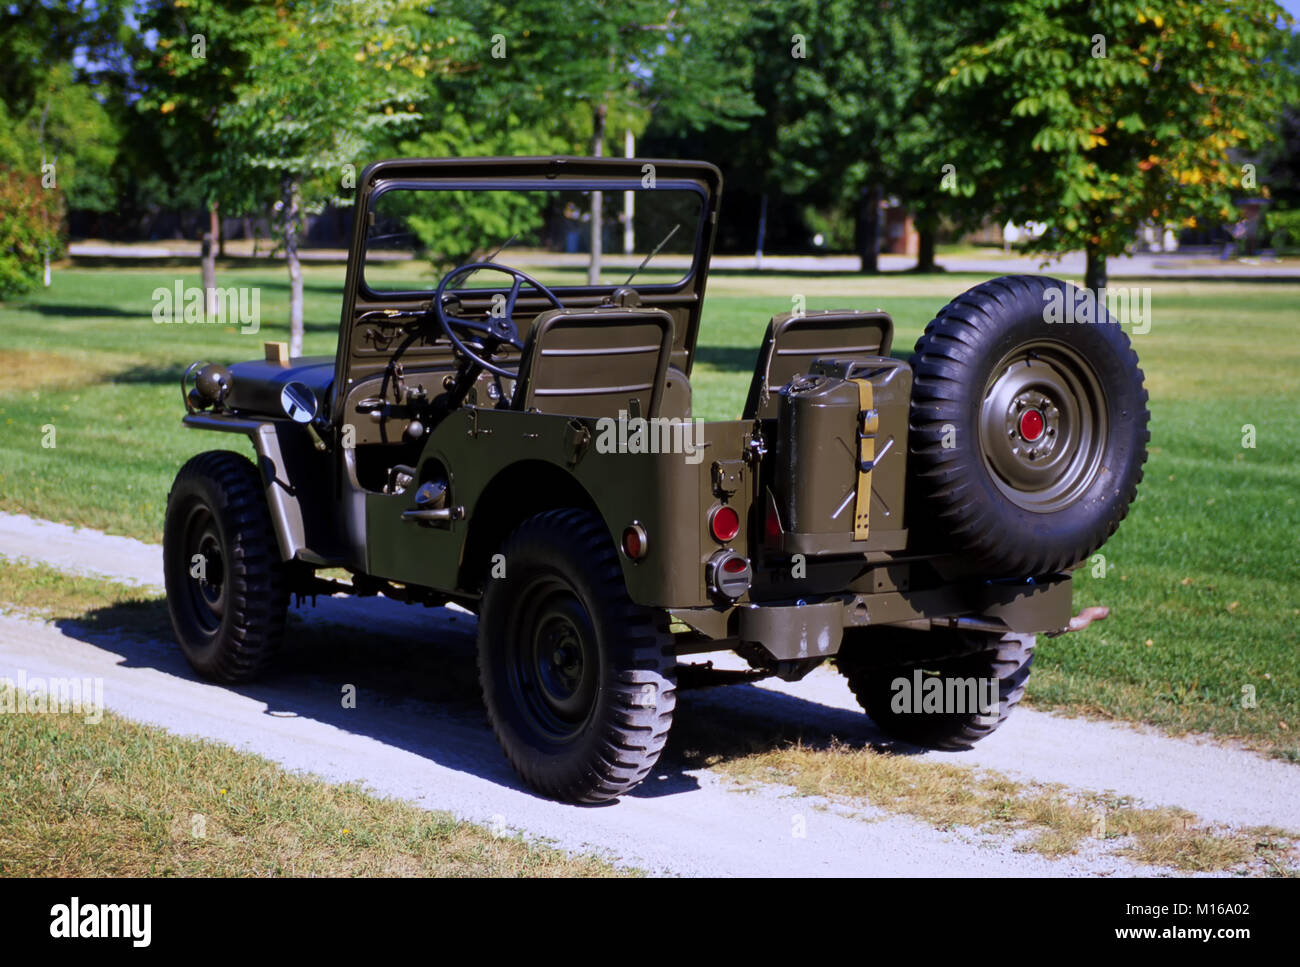 1951 Willys Model M38 rear view Stock Photo